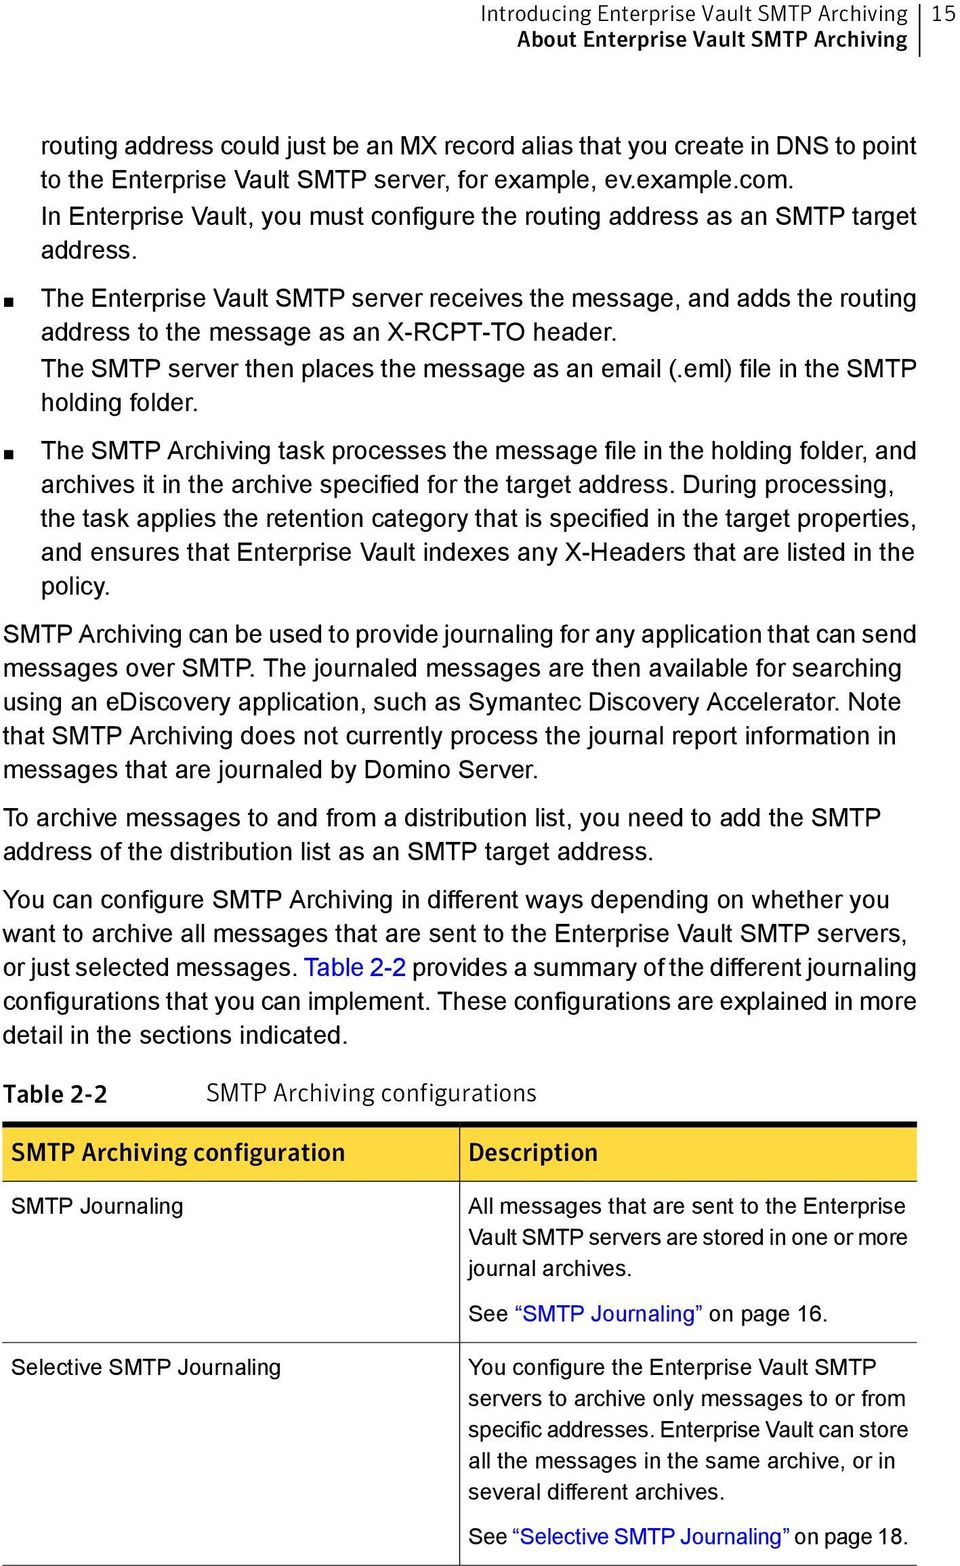 The Enterprise Vault SMTP server receives the message, and adds the routing address to the message as an X-RCPT-TO header. The SMTP server then places the message as an email (.